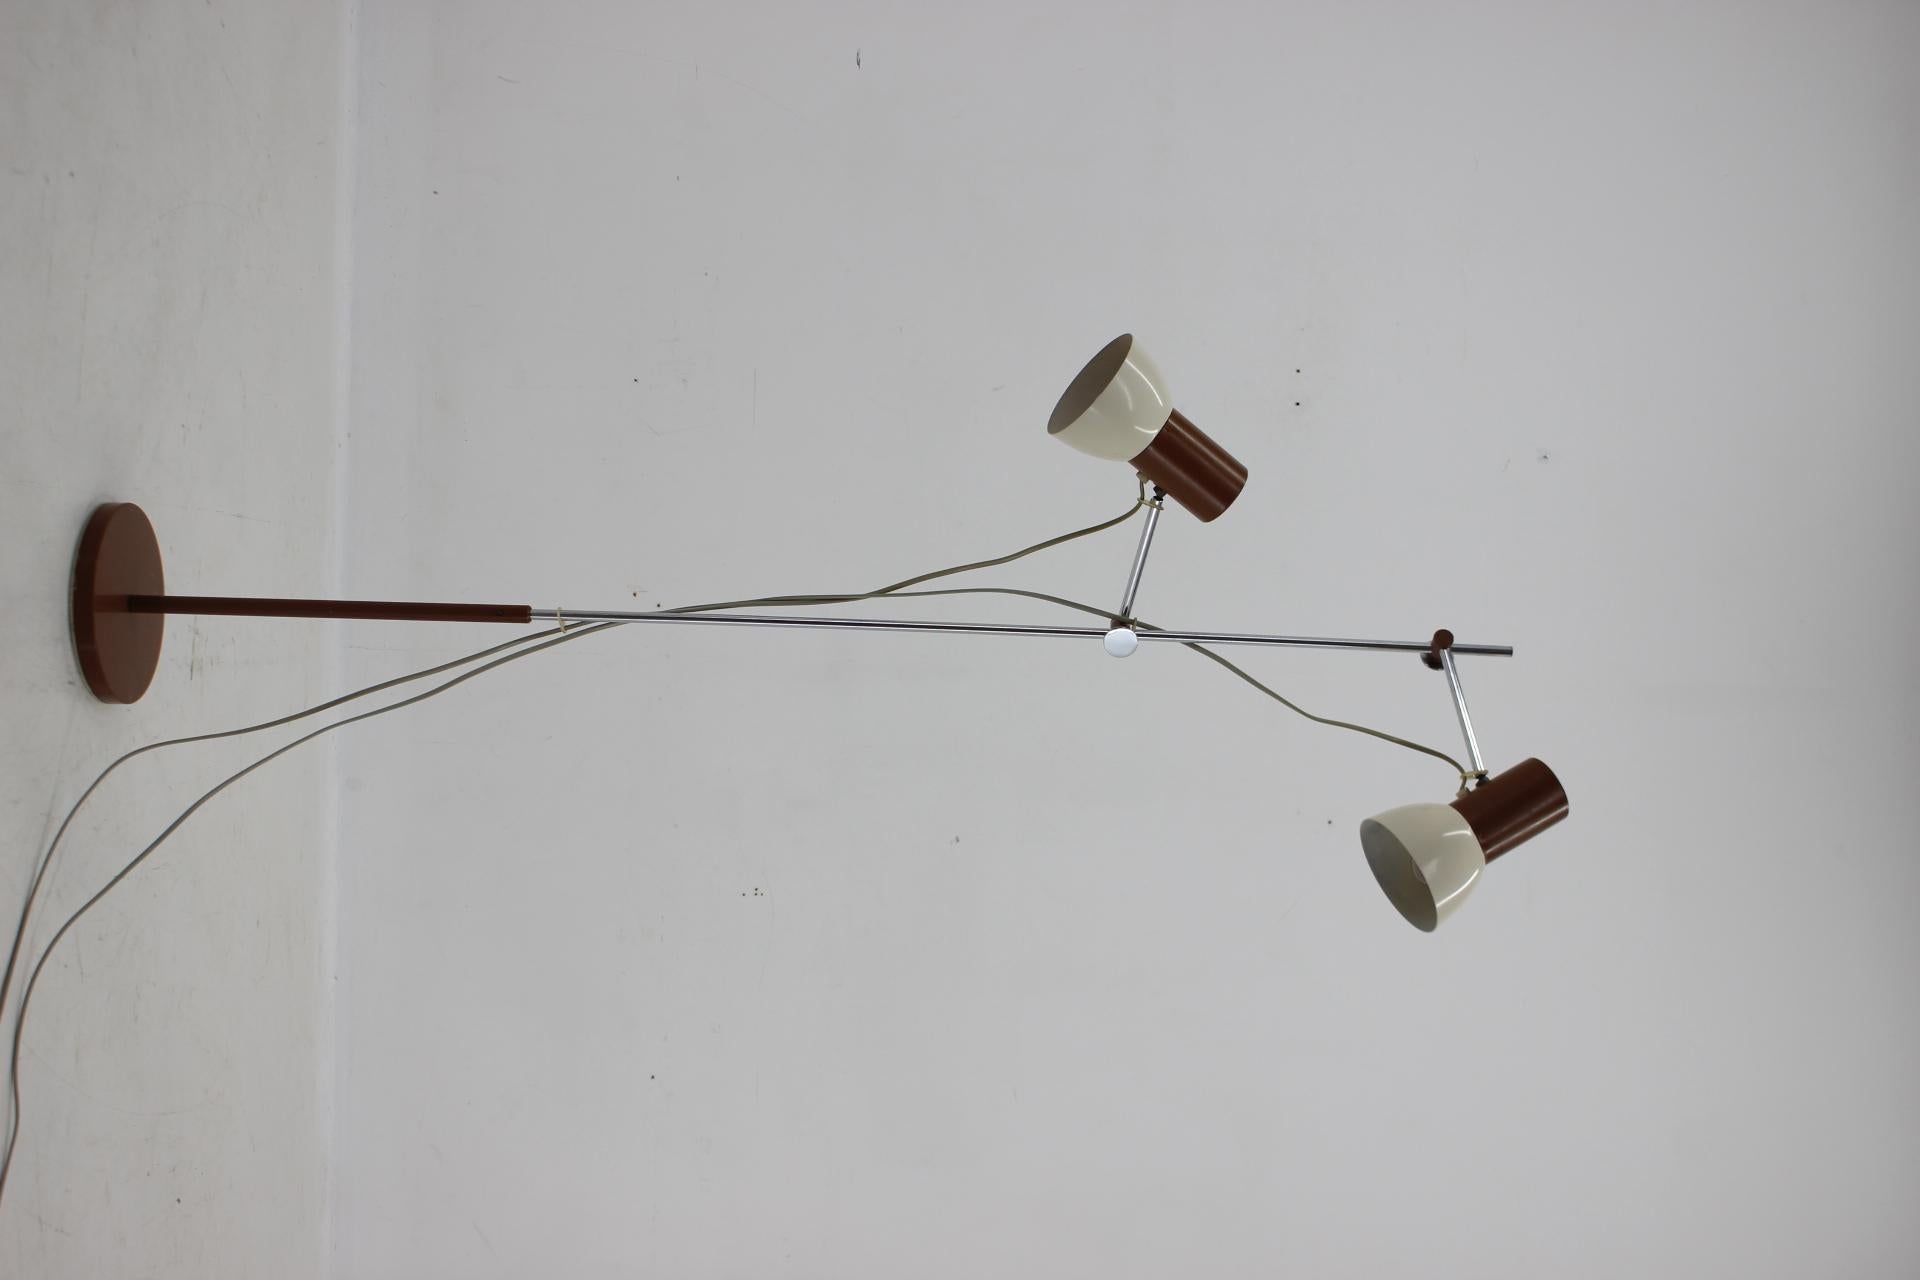 Vintage floor lamp with chrome central bar with two independent spotlights, can be moved and rotated in height. Bulbs: 2 x E27 or E26. US plug adapter included.